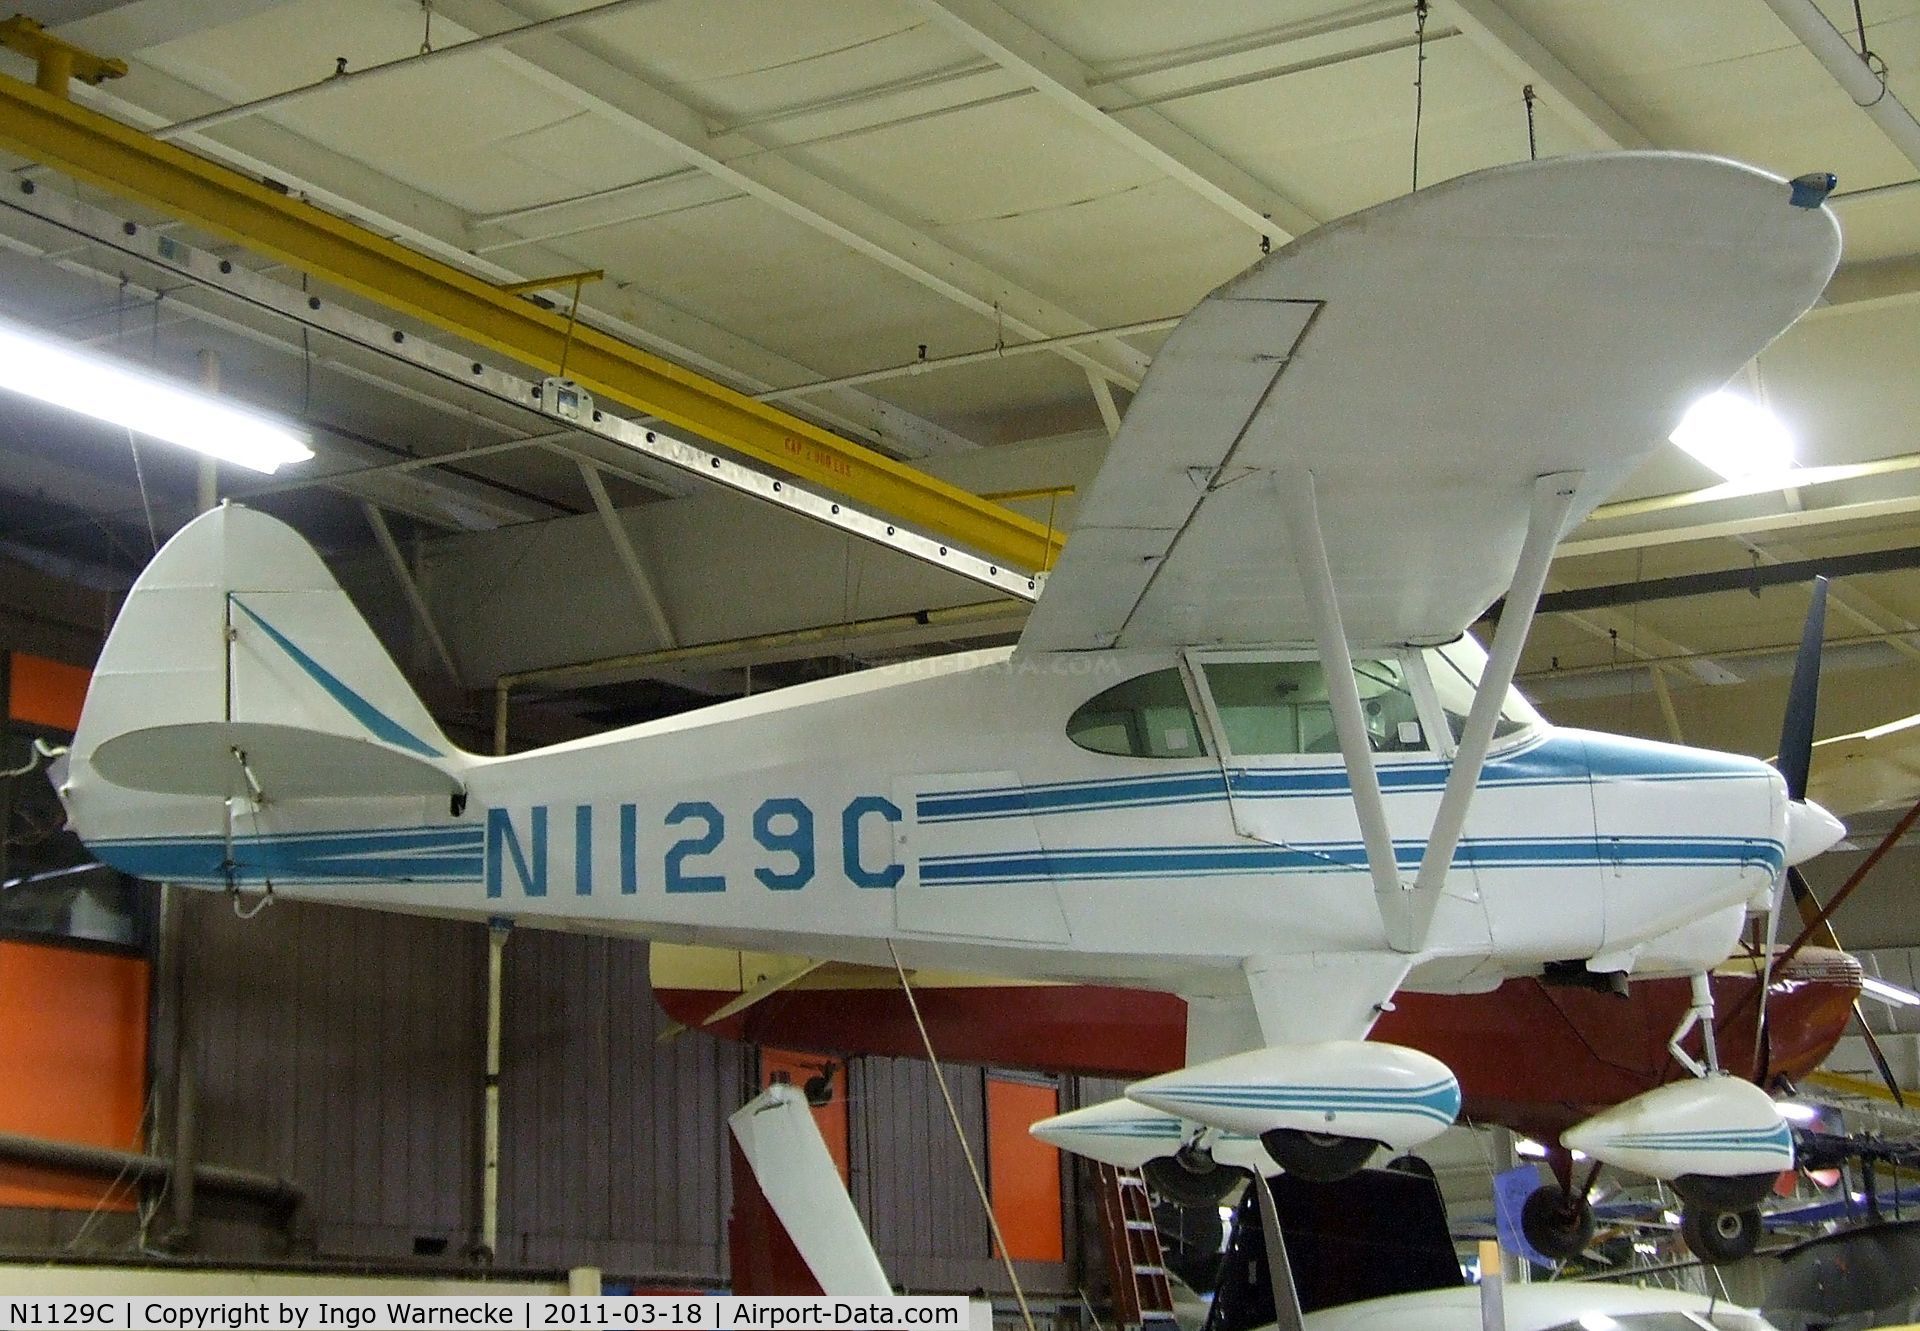 N1129C, 1953 Piper PA-22-150 Tri-Pacer C/N 22-964, Piper PA-22 Tri-Pacer at the Mid-America Air Museum, Liberal KS